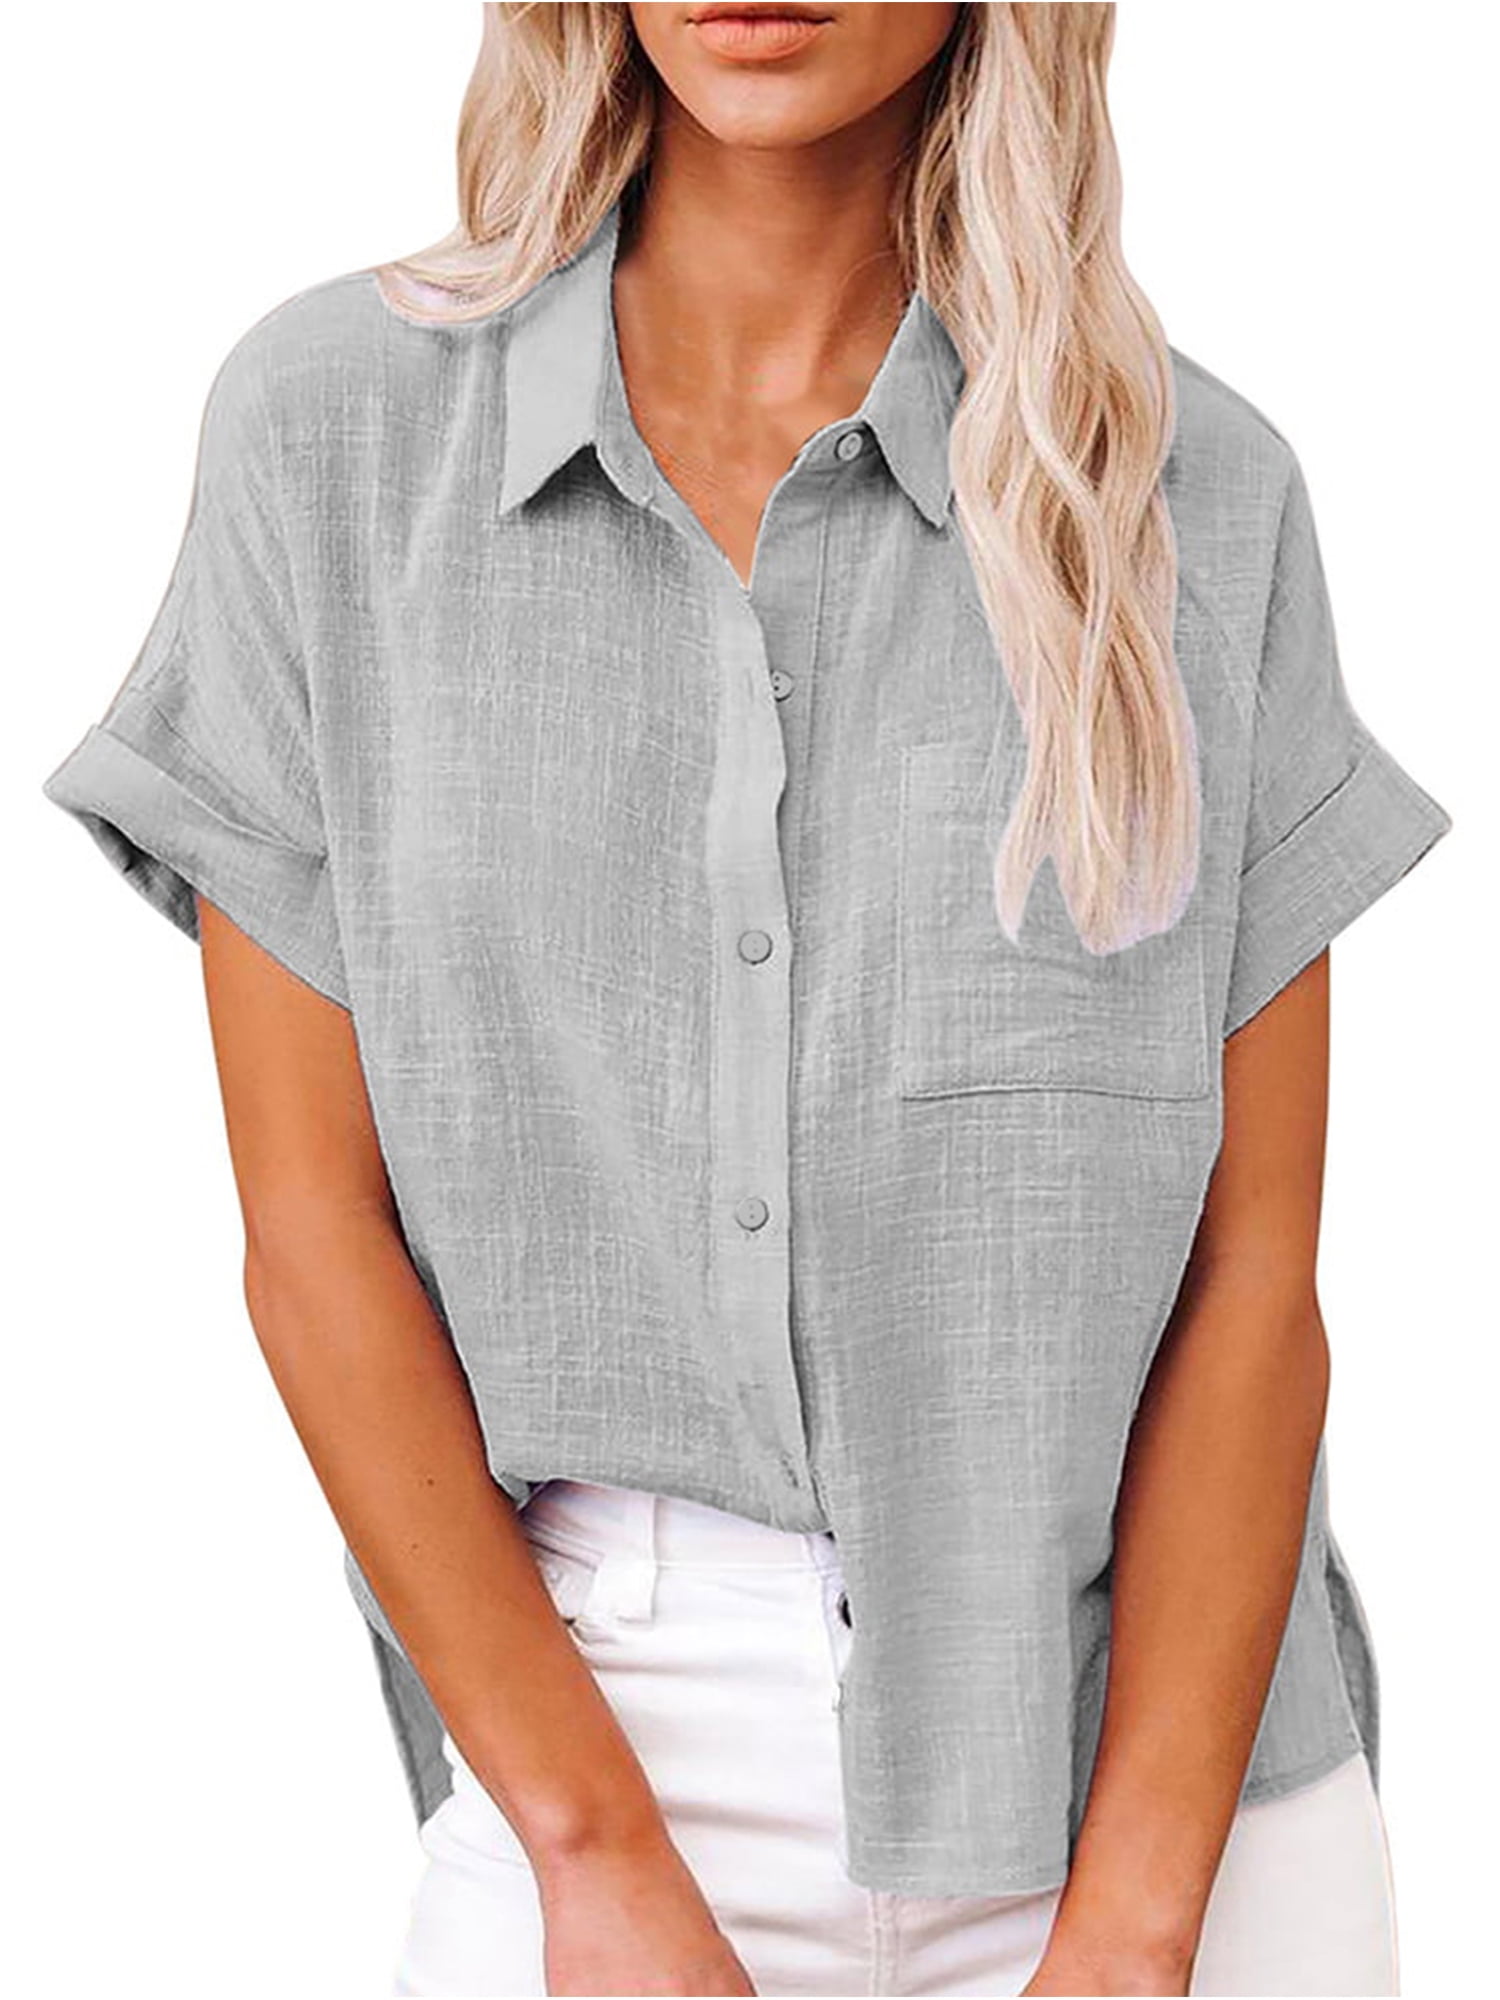 Hsmqhjwe Overstock Items Clearance All One Sleeve Shirts for Women Womens Cotton Button Down Shirts Short Sleeves Office Shirts Round Neck Casual